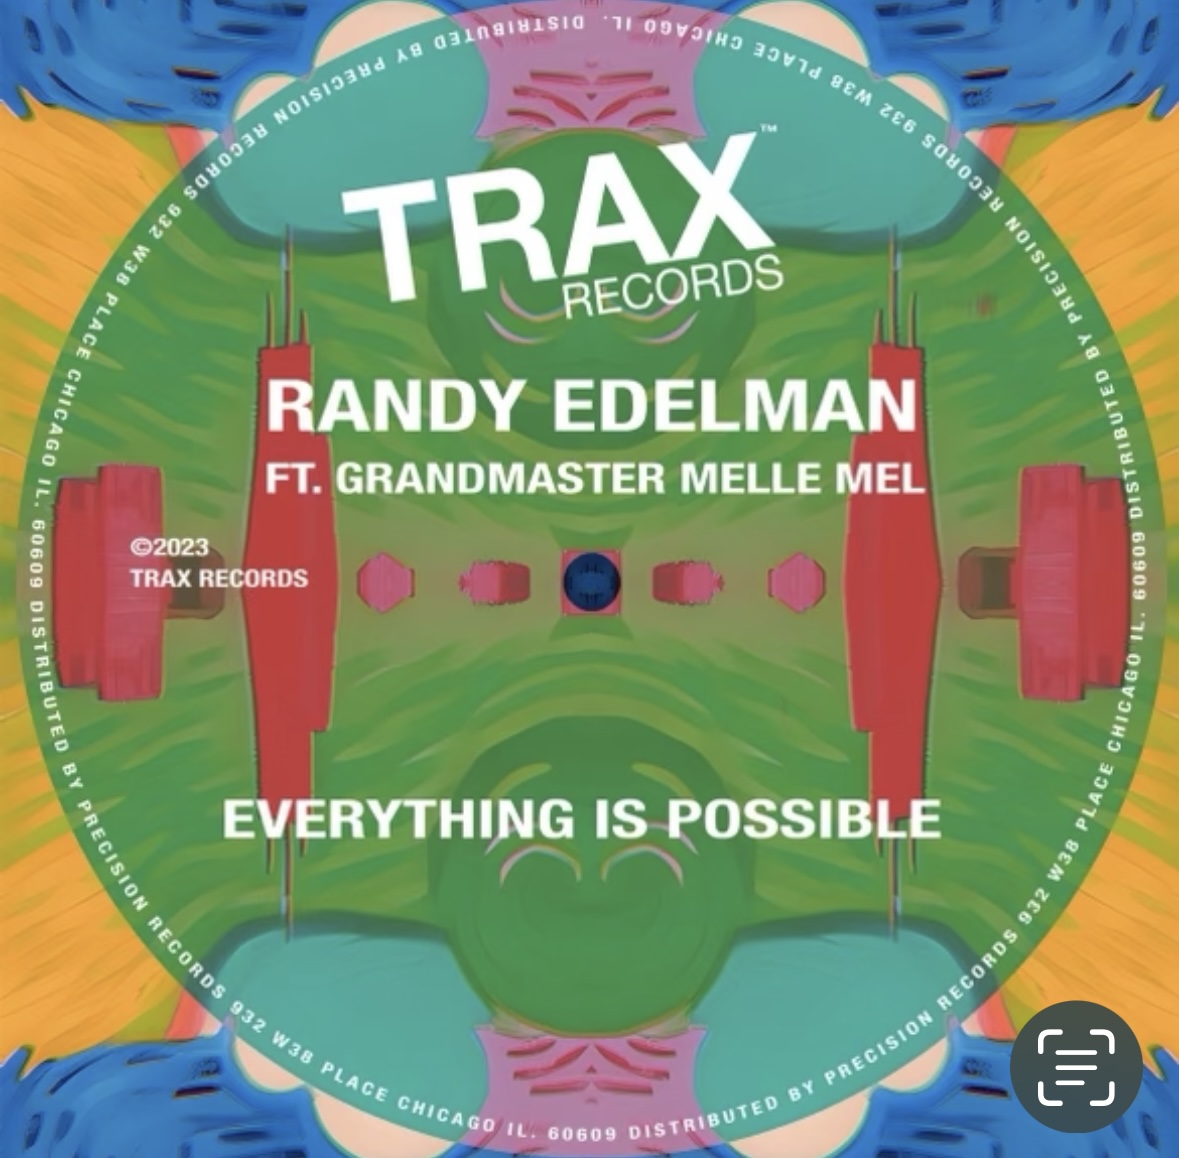 TRAX Records Releases New Randy Edelman Single "Everything Is Possible" Featuring Two-Time Grammy Winner Grandmaster Melle Mel 